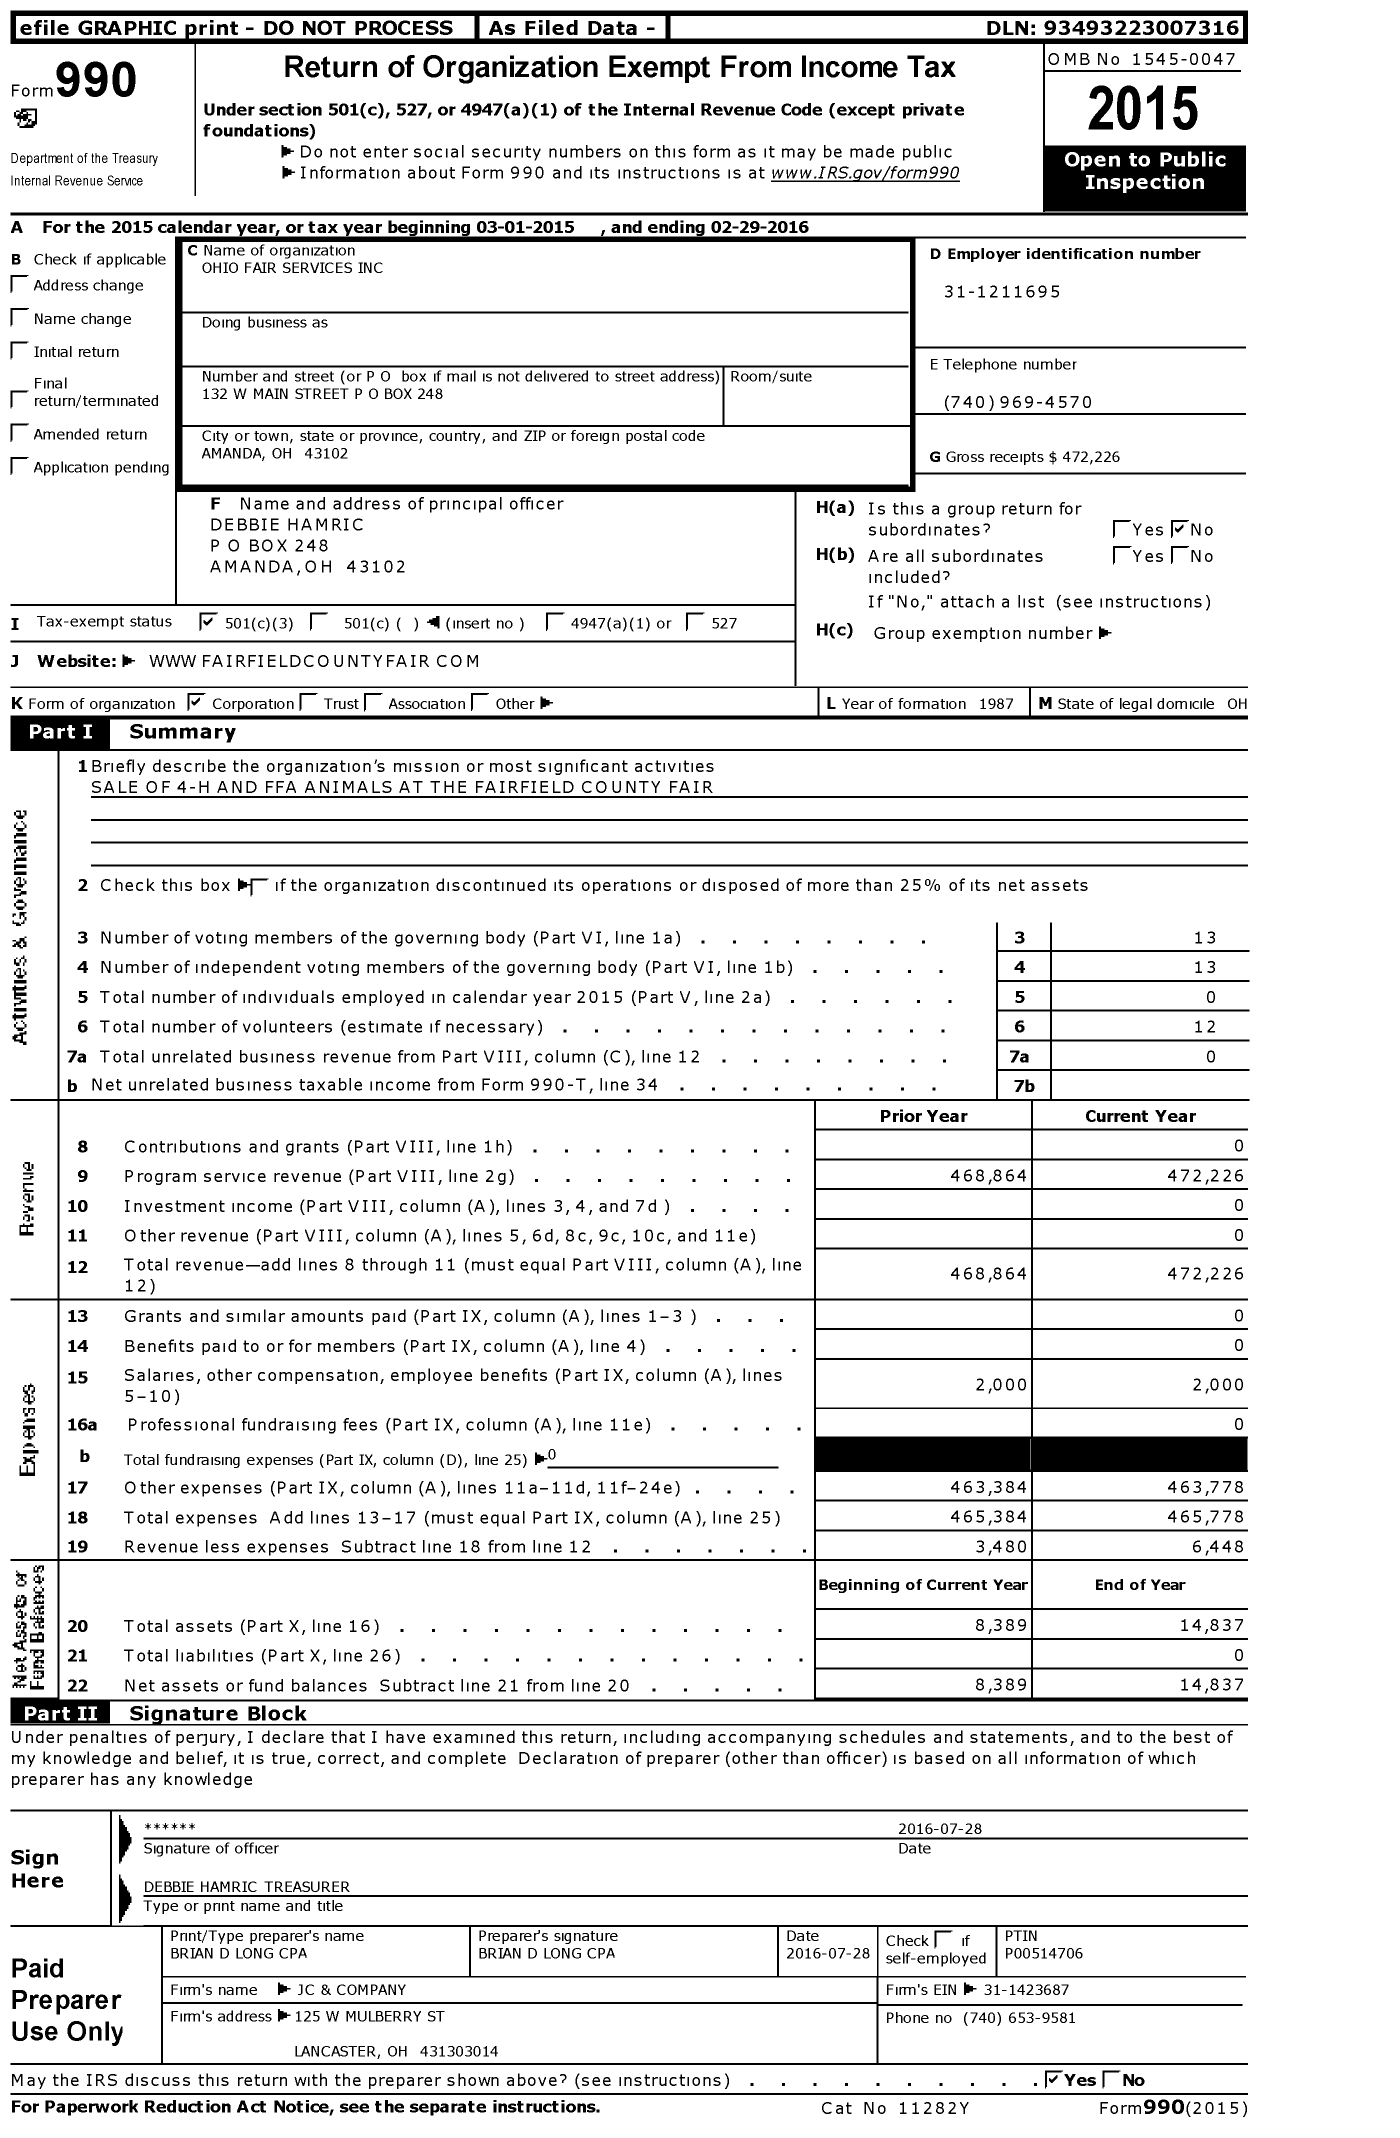 Image of first page of 2015 Form 990 for Ohio Fair Services